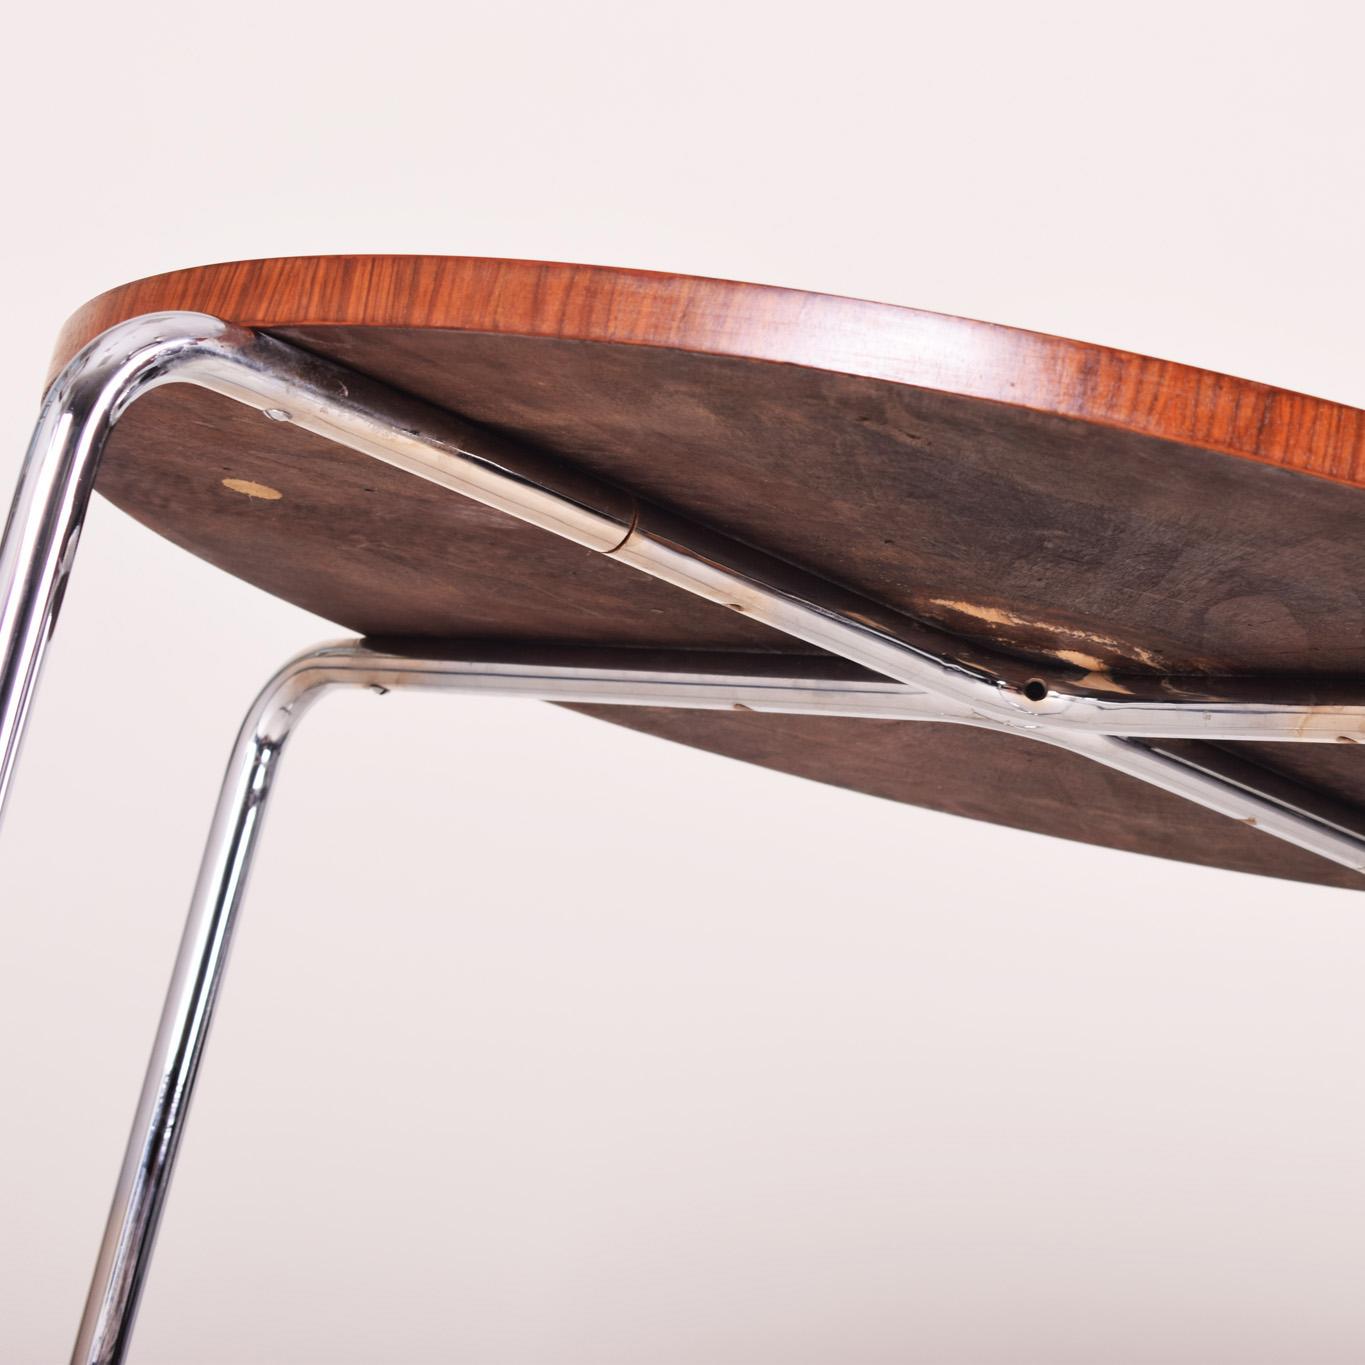 Brown Bauhaus Table Made in 1930s Czechia, Fully Restored Walnut and Chrome For Sale 1